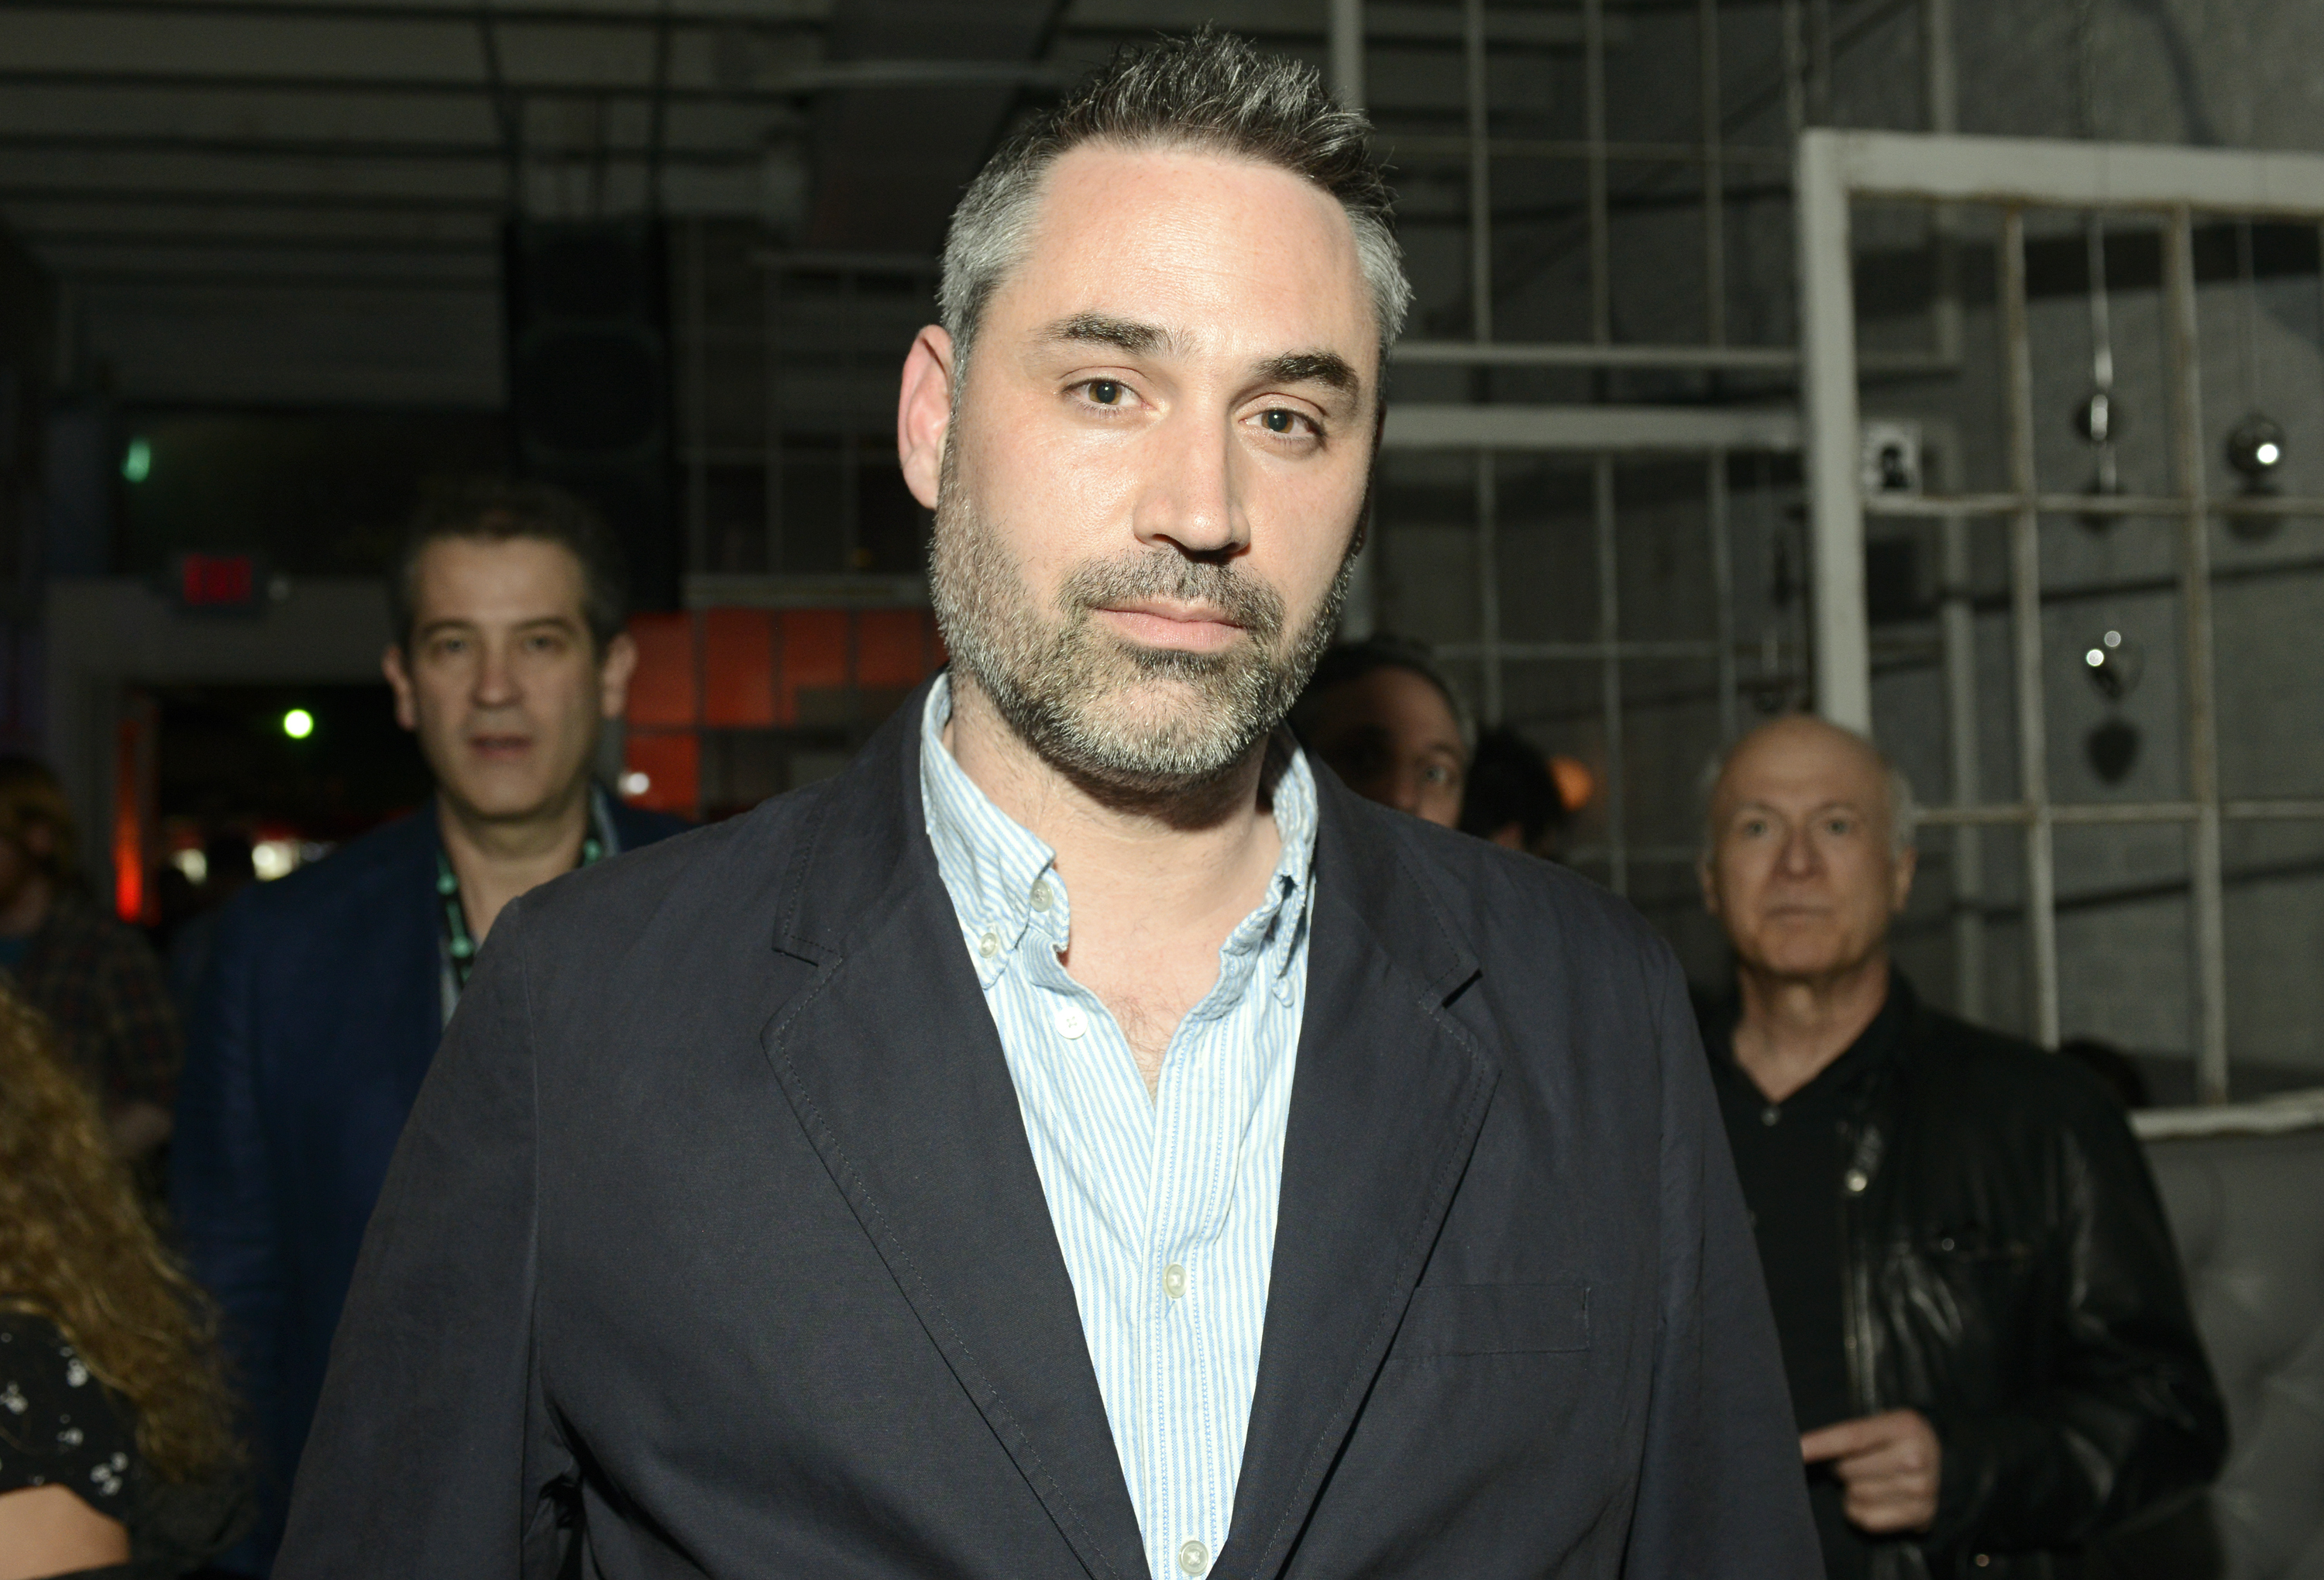 Alex Garland attends the SXSW "Ex Machina" Premiere Party at the Swan Dive nightclub on March 15, 2015 in Austin. (Tim Mosenfelder—Getty Images)